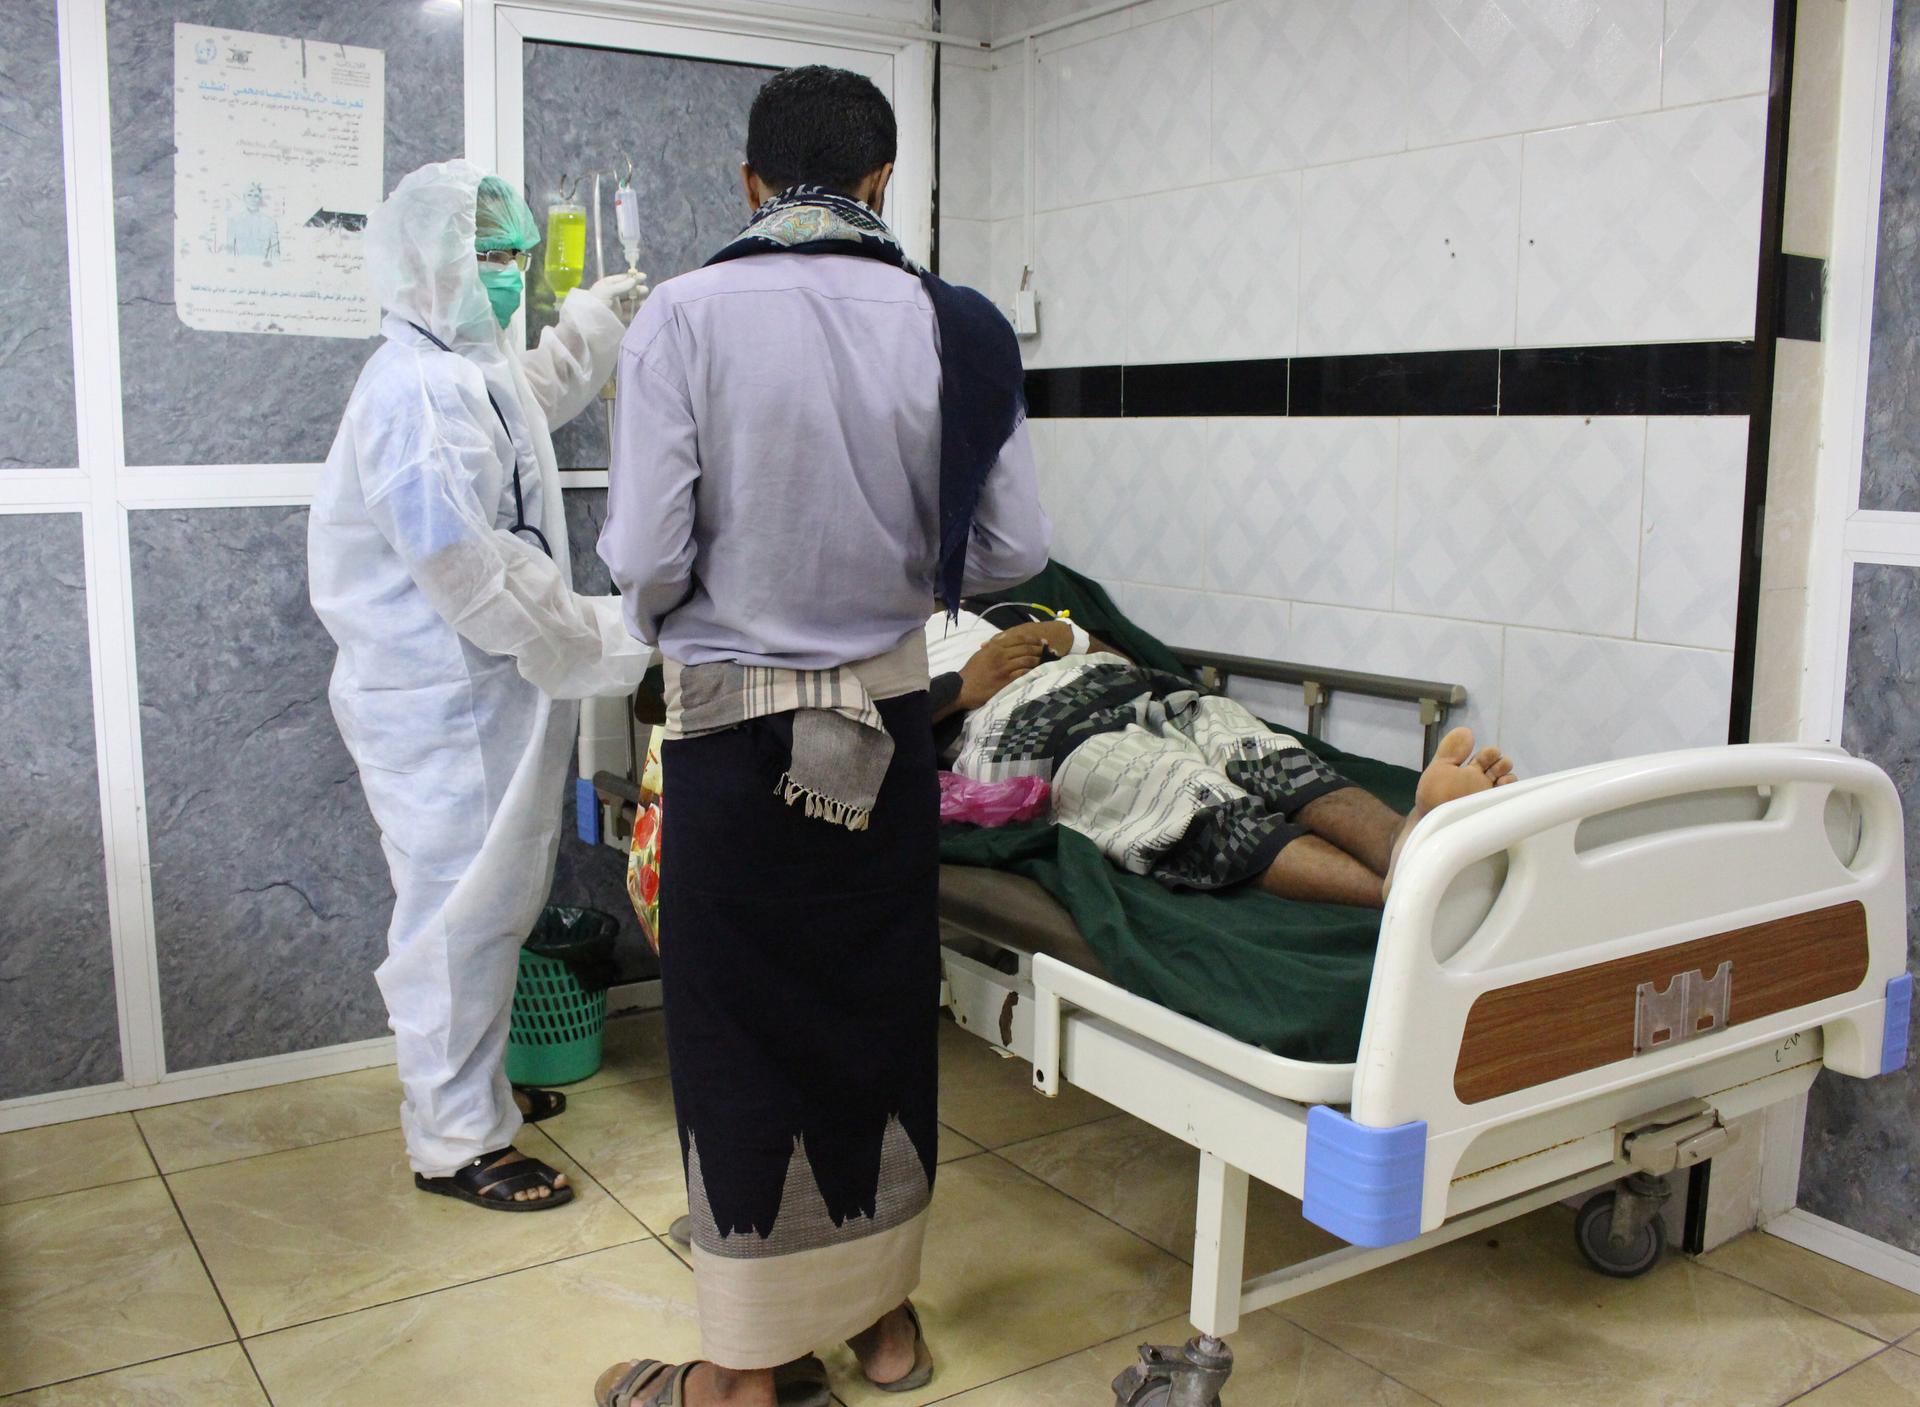 A medic wearing a protective suit attends to a patient at the emergency ward of a hospital amid concerns about the spread of the coronavirus disease, COVID-19, in Aden, Yemen